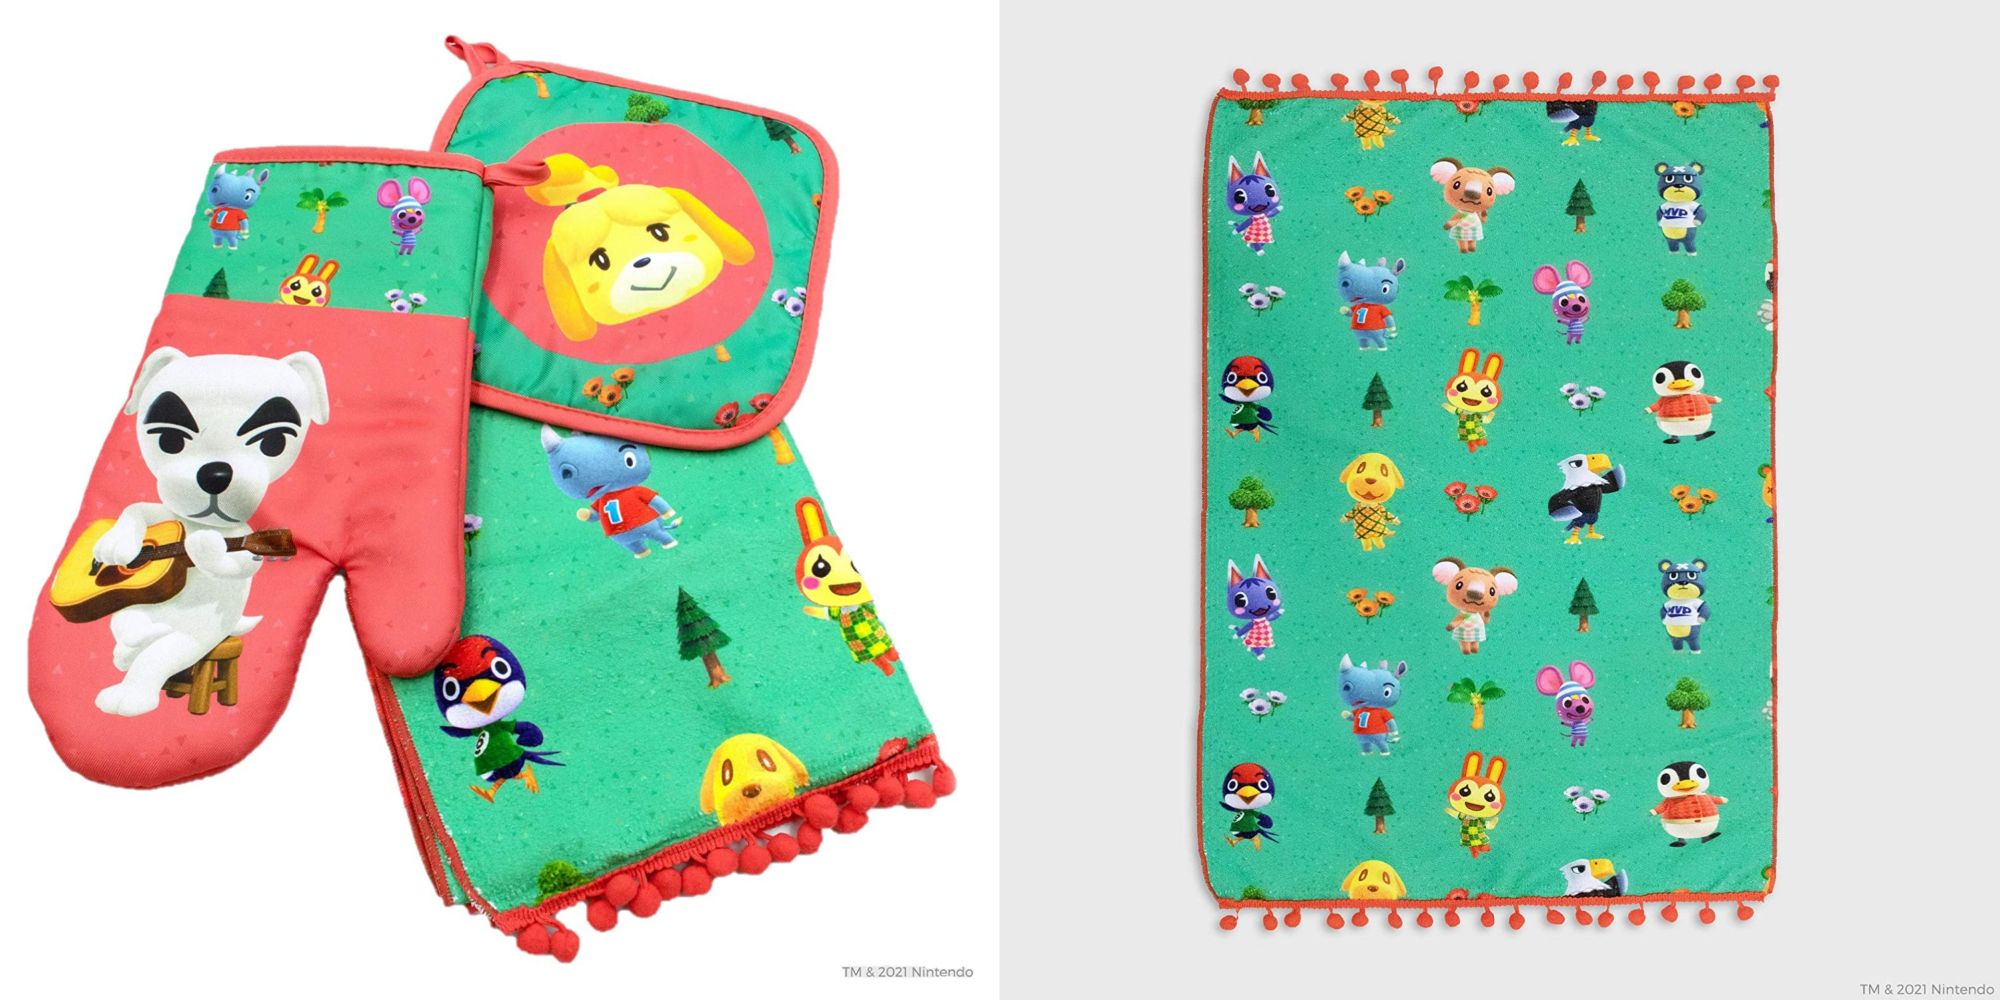 Full shot of Animal Crossing oven mitts, potholders, kitchen towels, and kitchen towels